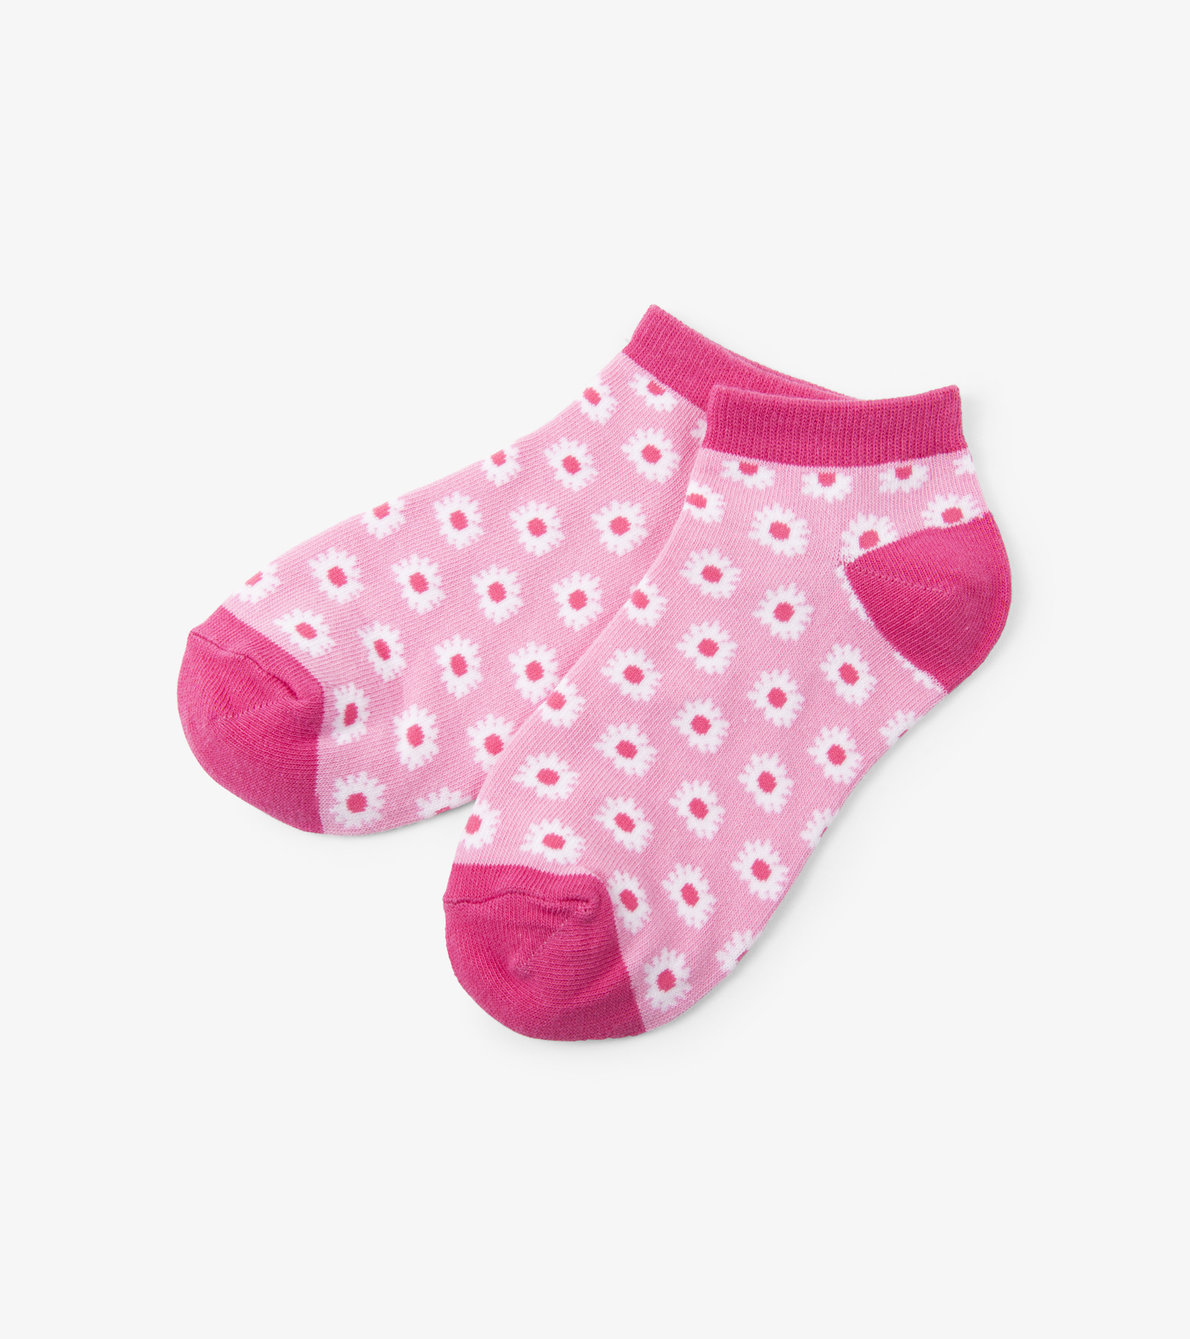 View larger image of Daisy Women's Ankle Socks